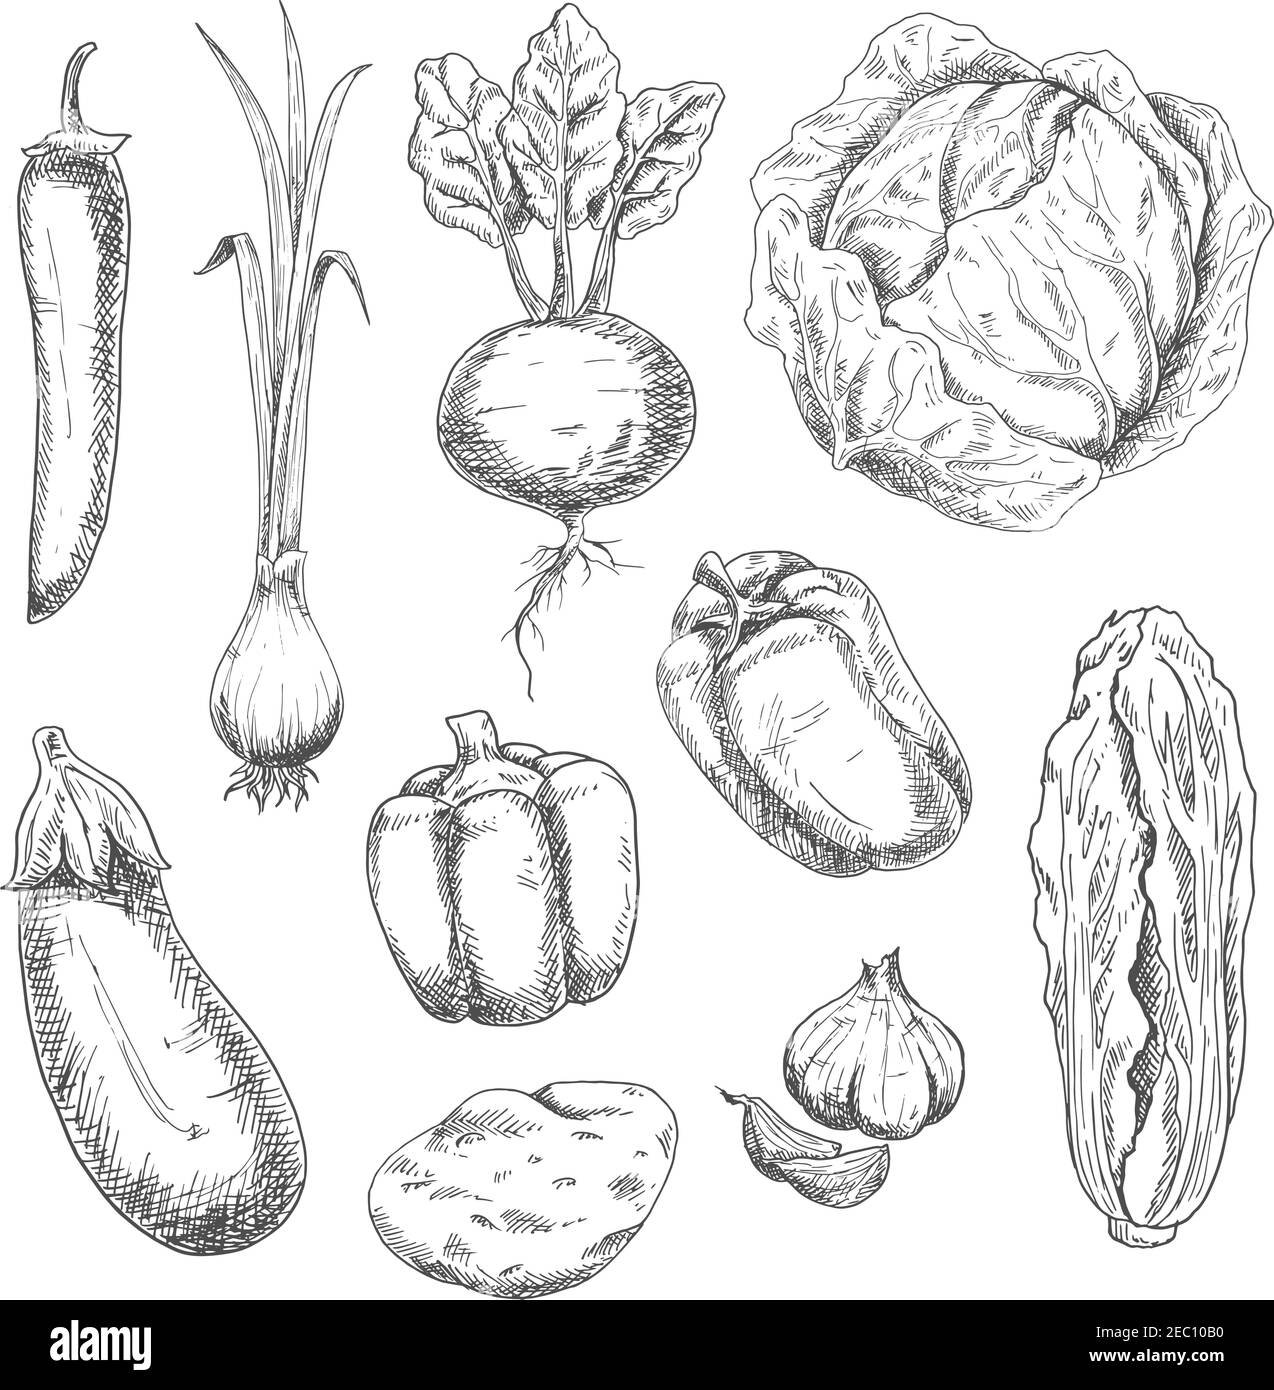 Farm fresh crunchy cabbages, bell peppers and beet, potato, pungent garlic and green onion, eggplant, hot cayenne pepper vegetables sketch drawing ico Stock Vector